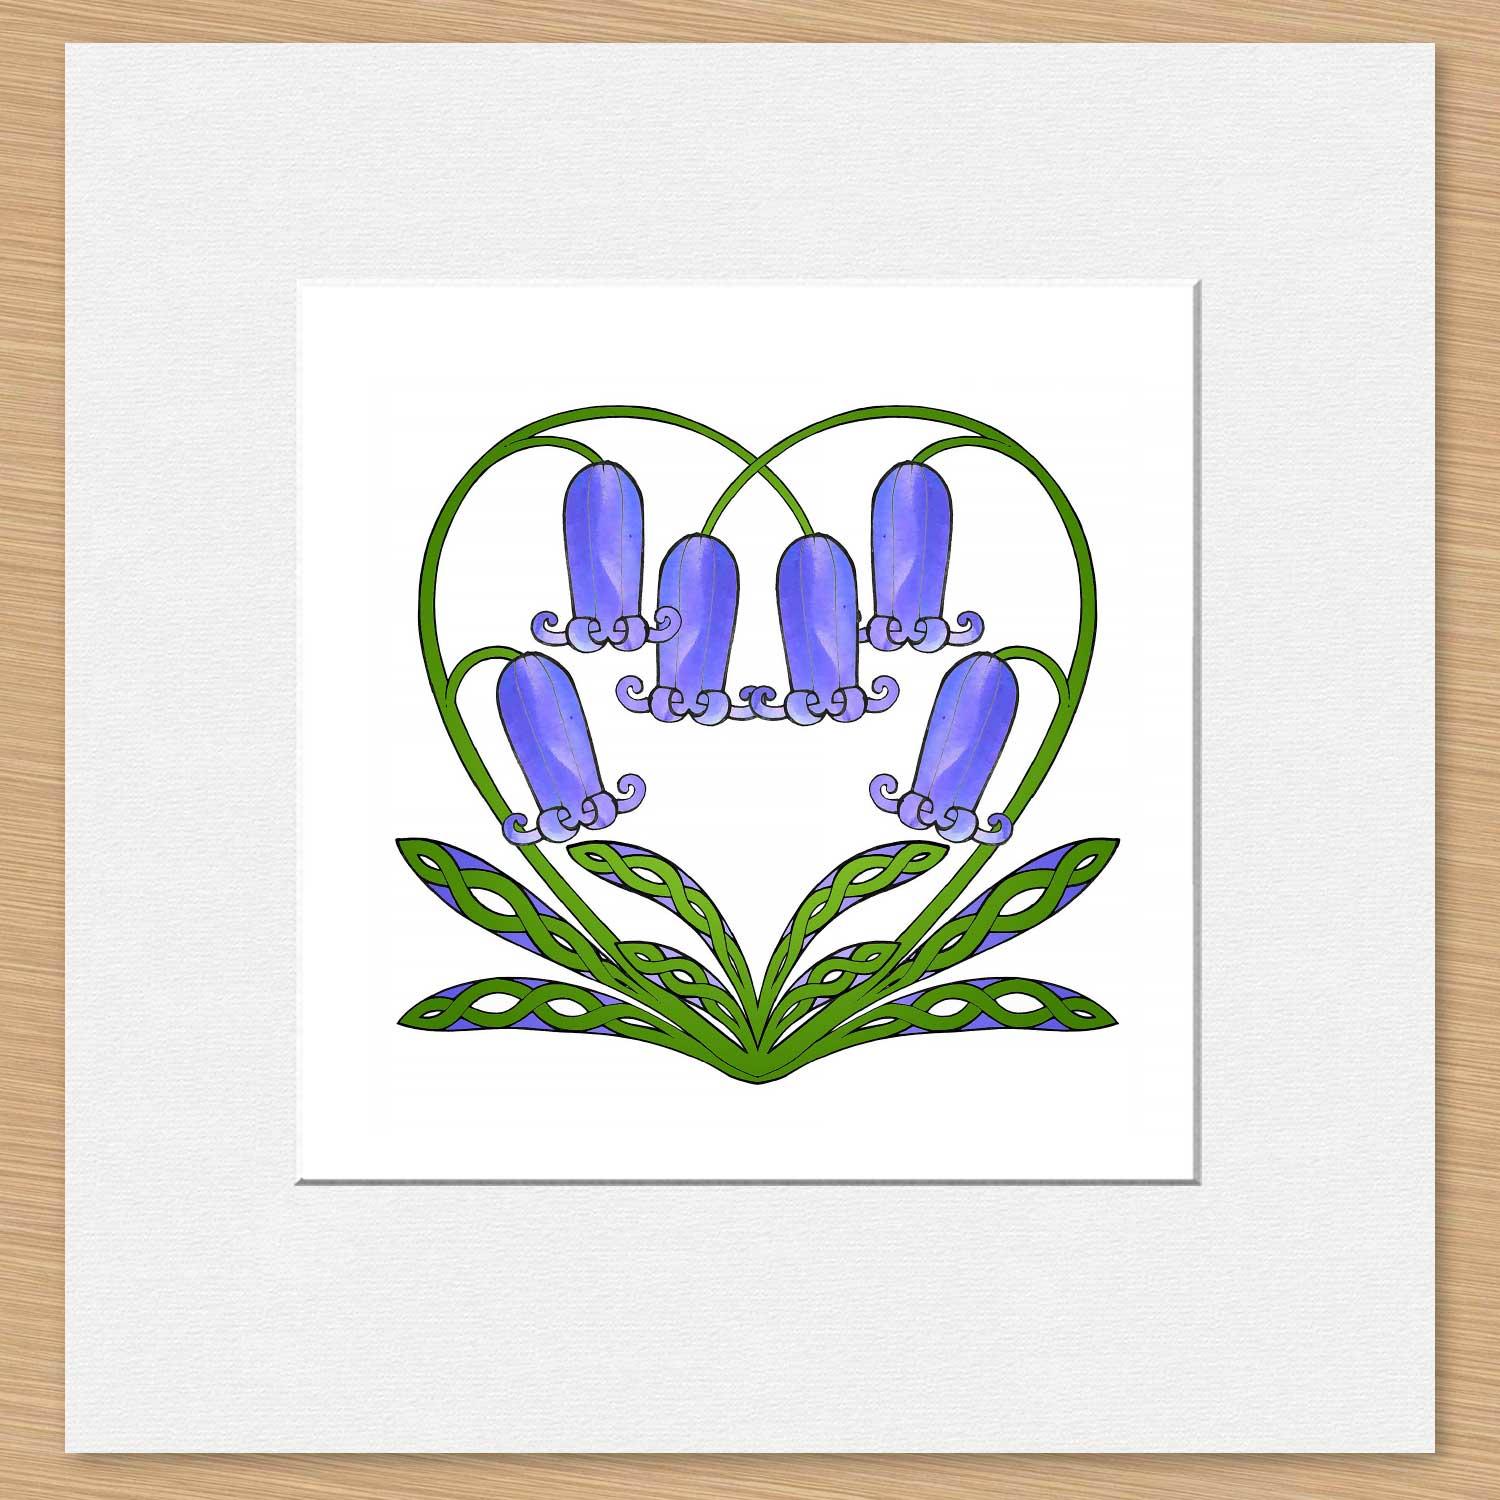 Bluebells Mounted Card from an original painting by artist Marjory Tait